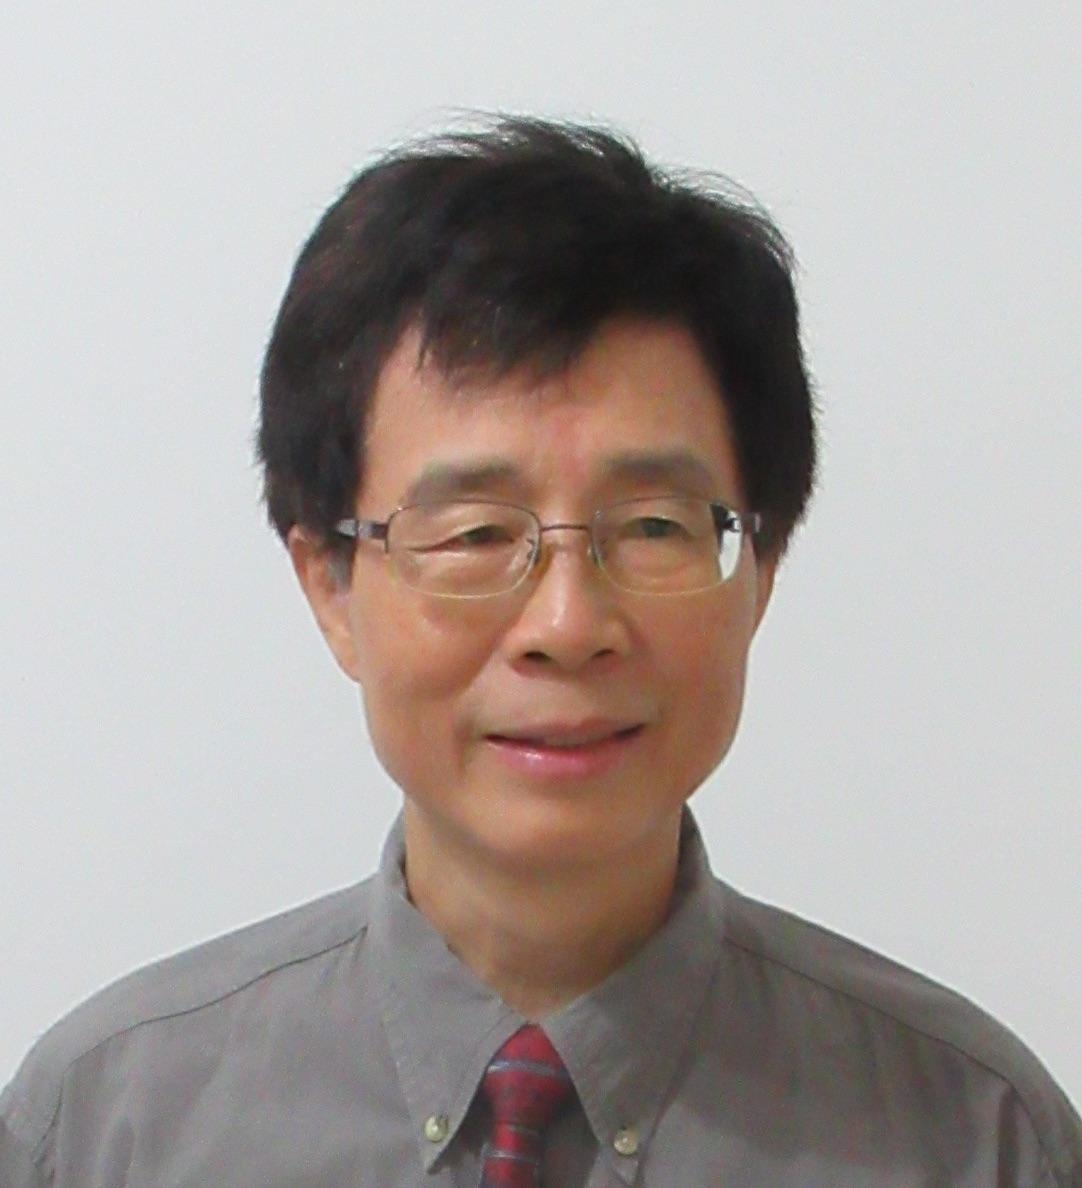 Chii Dong Chen